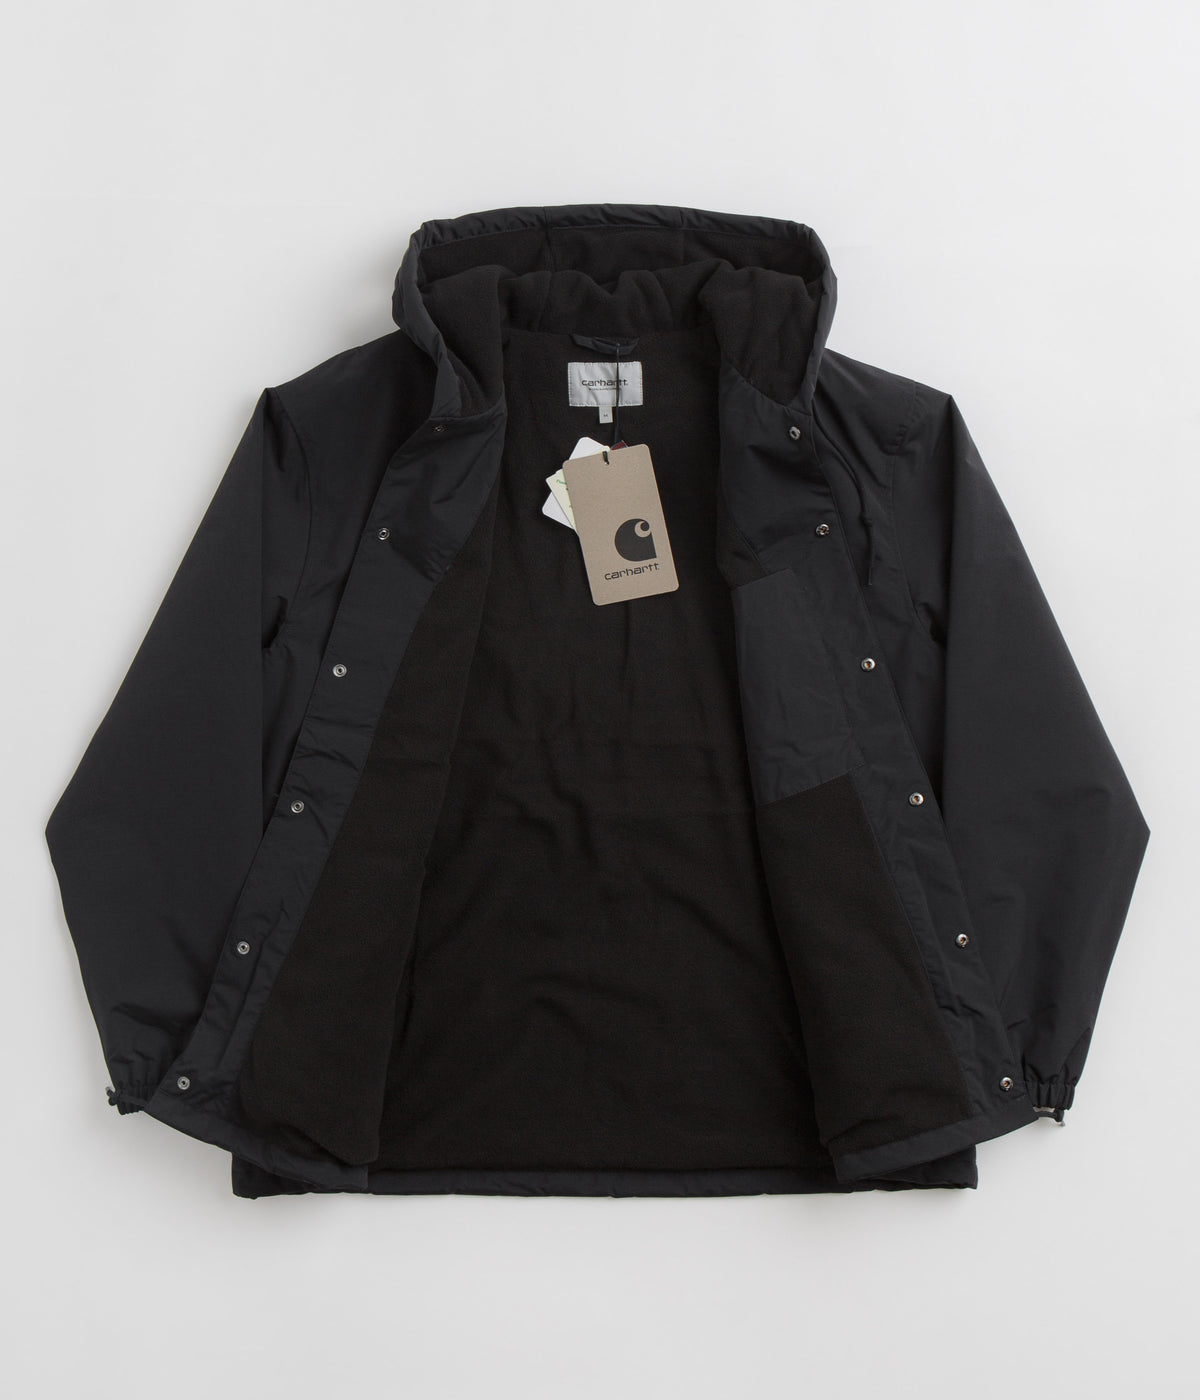 Carhartt Hooded Coach Jacket - Black / White | Always in Colour